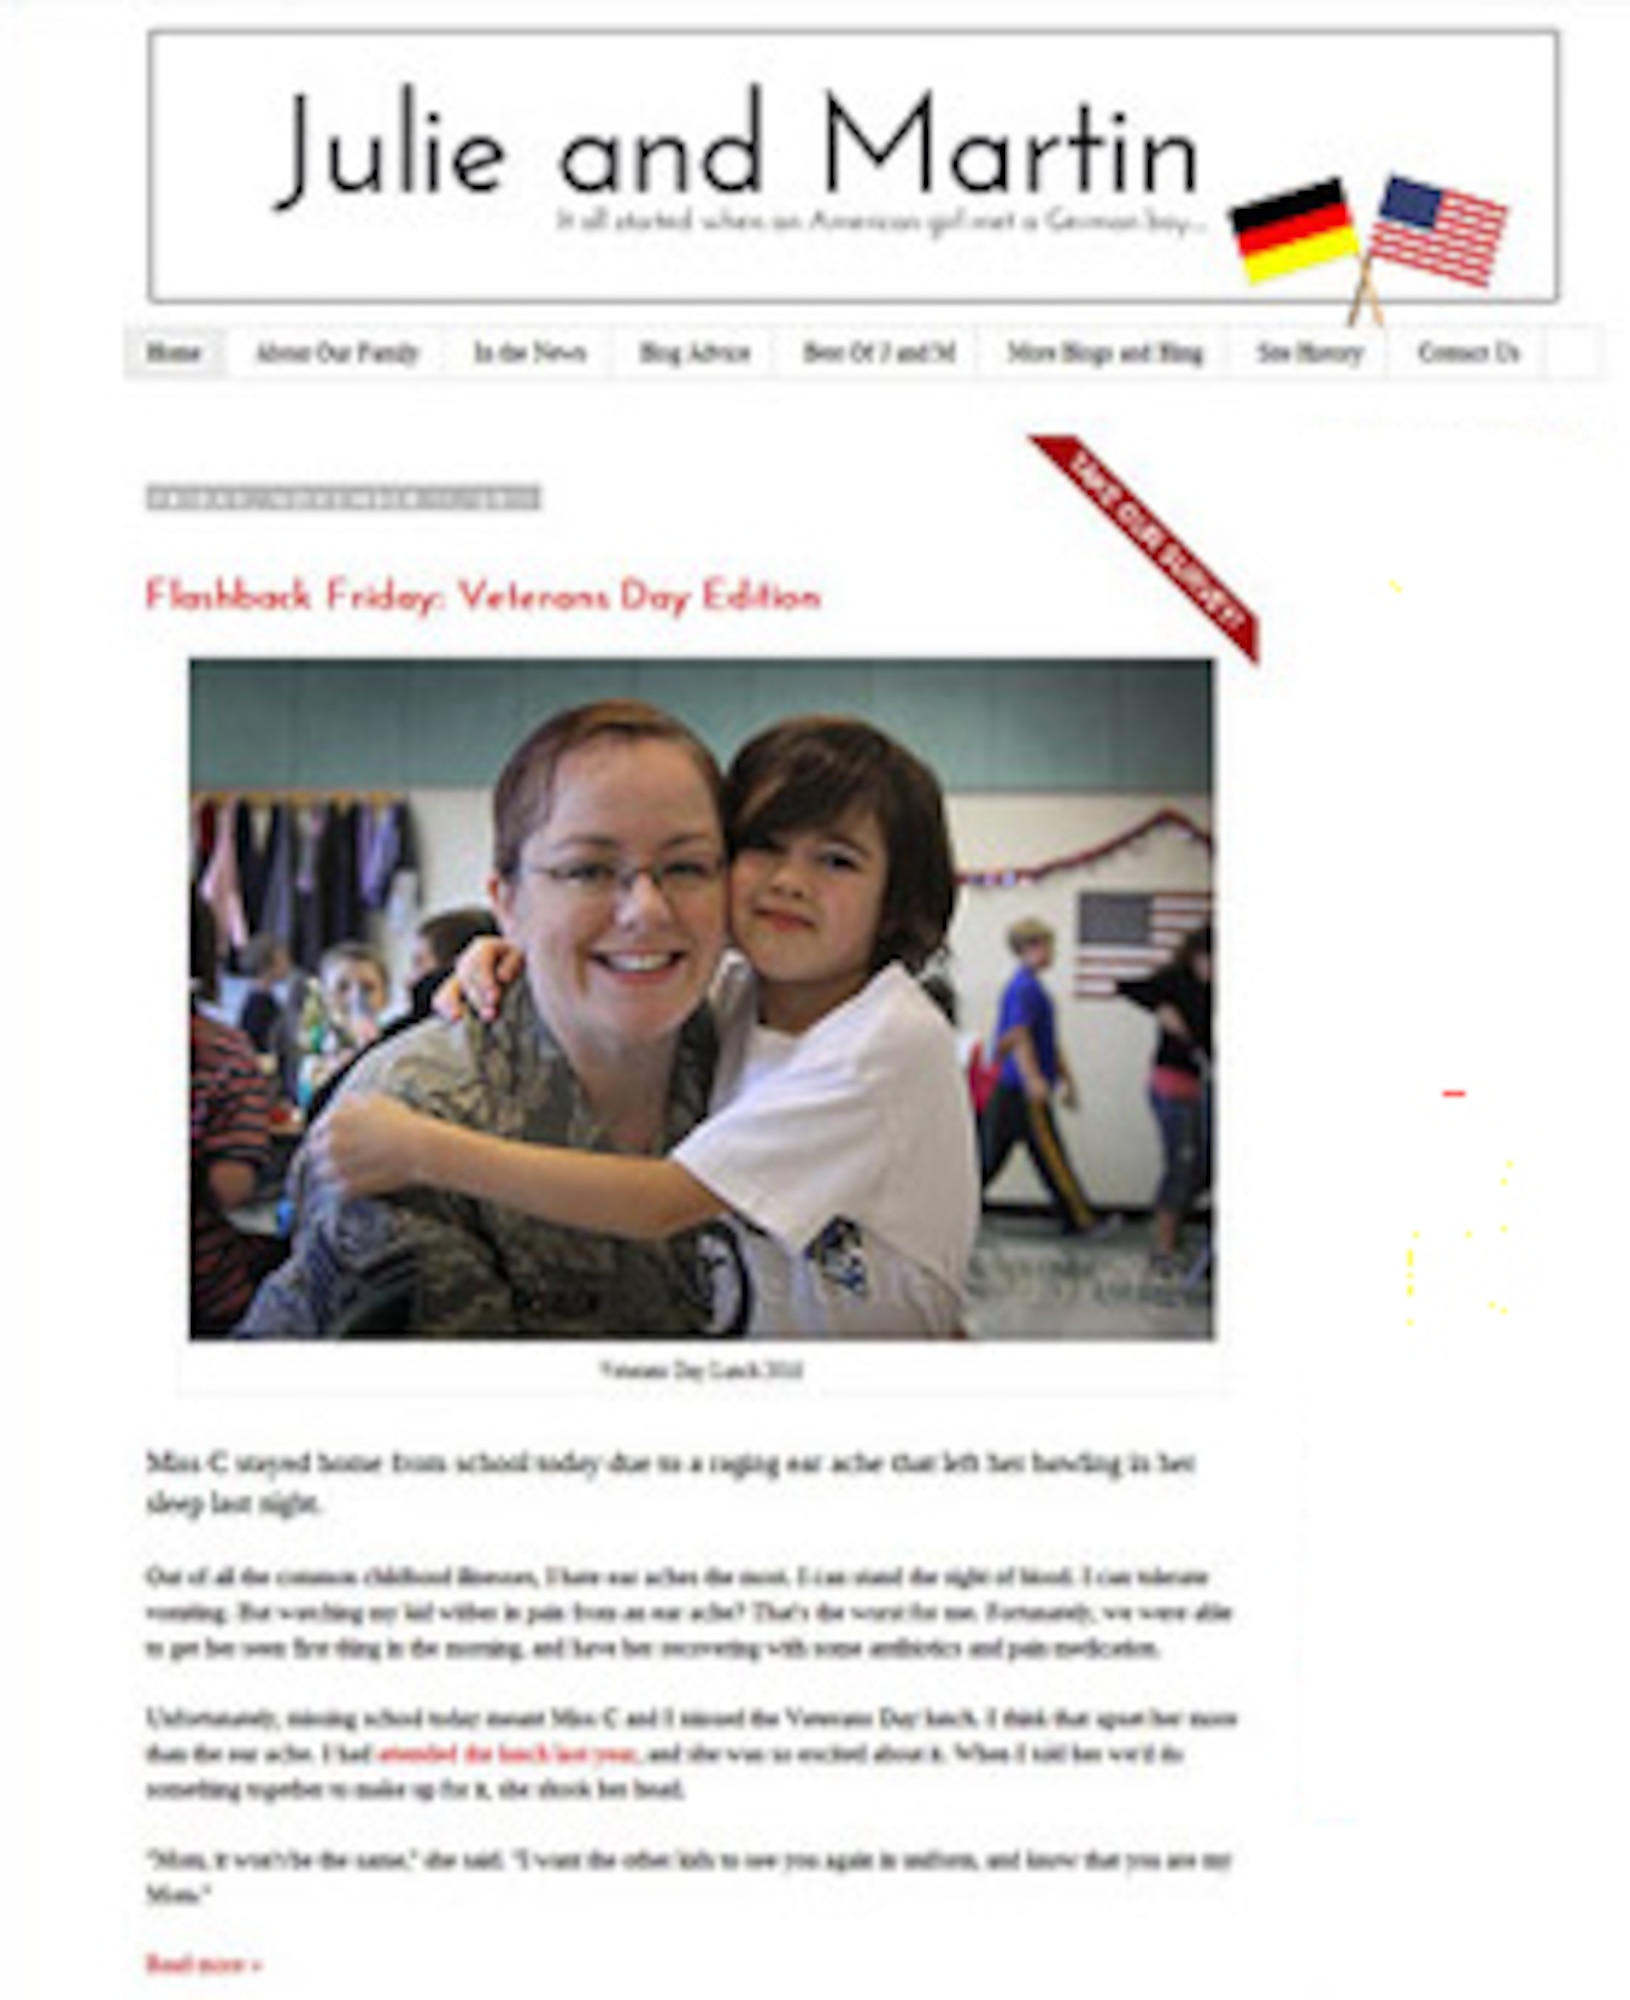 WRIGHT-PATTERSON AIR FORCE BASE, Ohio - Tech. Sgt. Julie Weckerlein, 445th Airlift Wing Public Affairs, and her husband, Martin, earned the 2011 Parents Magazine Readers Choice award for Best All-Around Mom Blog for their blog, Julie and Martin.

